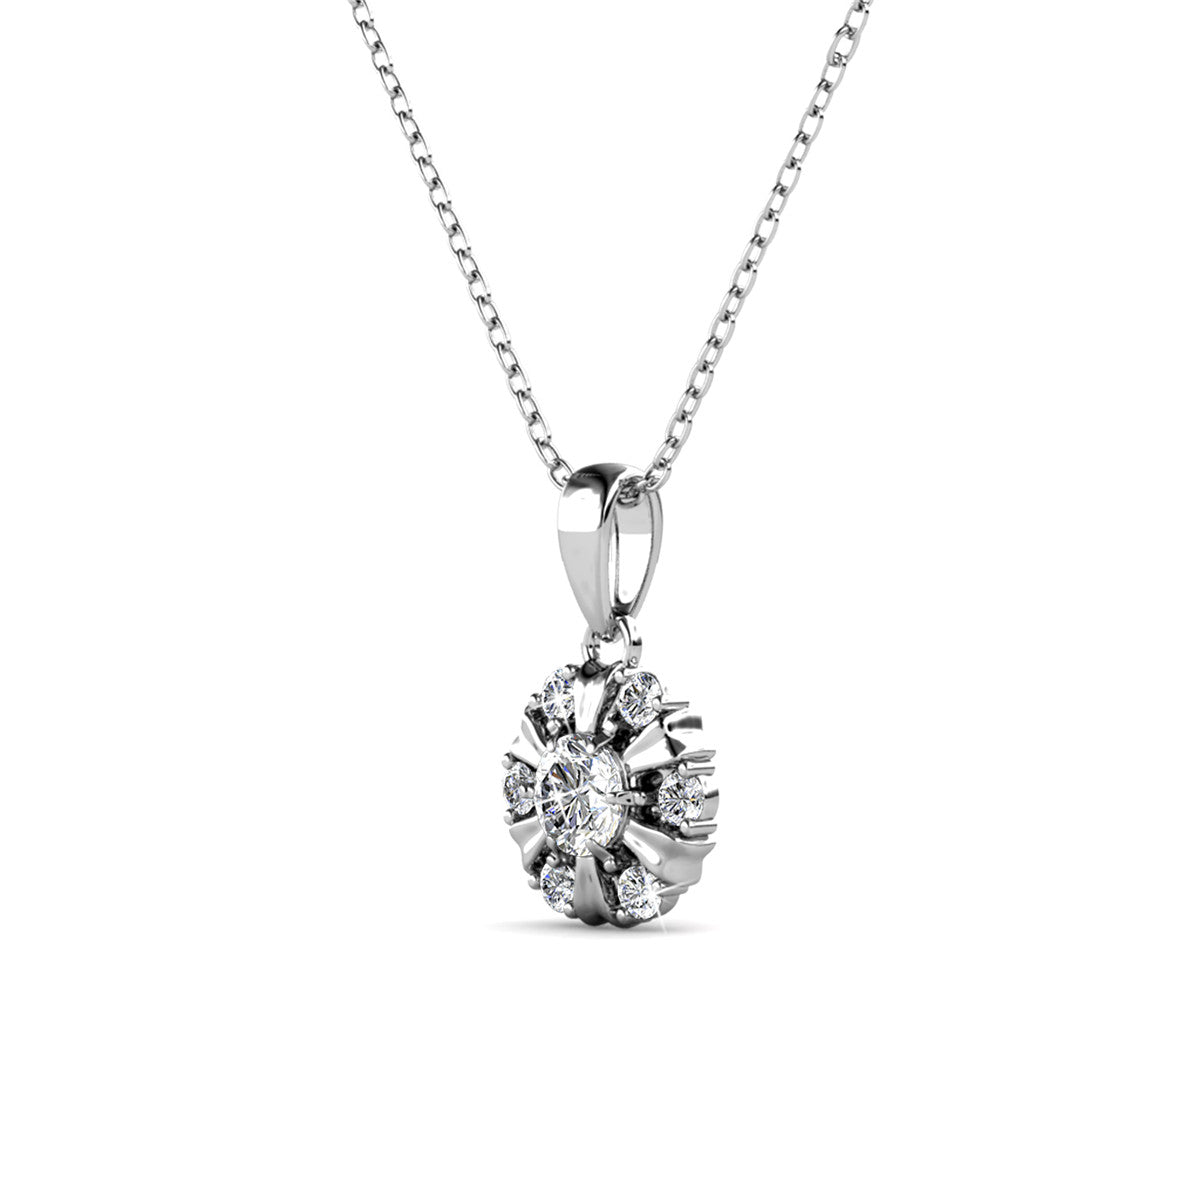 Millie 18k White Gold Plated Crystal Necklace